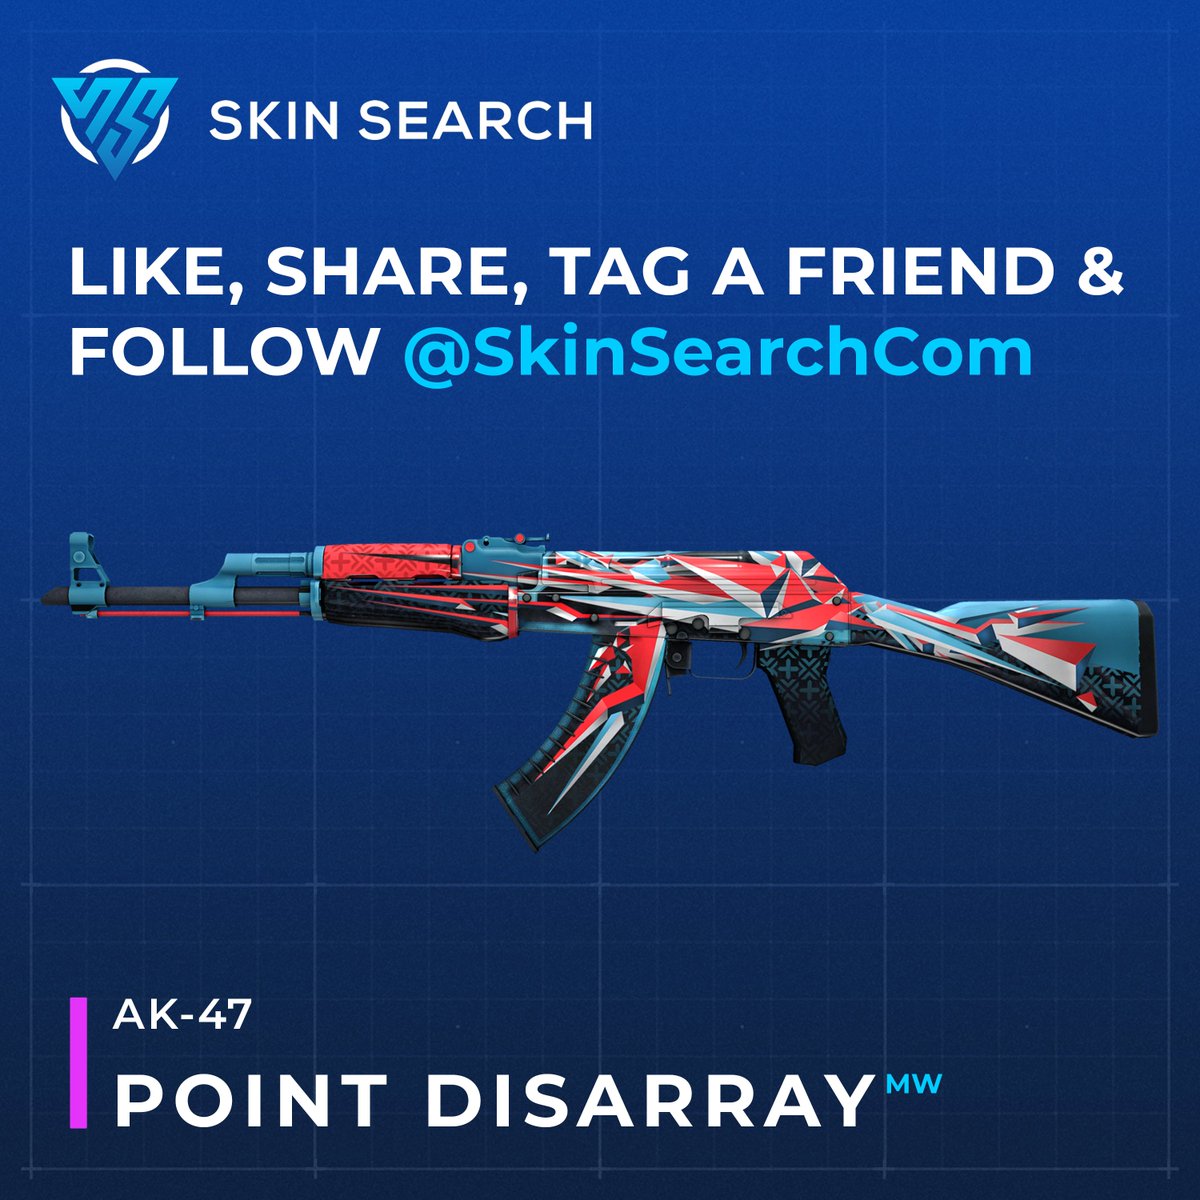 ⚡️FLASH GIVEAWAY⚡️ What better way to replace a Point Disarray giveaway, than with another Point Disarray giveaway?! To enter, all you need to do is: -Like this post -Tag someone in the comments -Share this post -Follow @SkinSearchCom on X/Twitter Entries close at 14:00